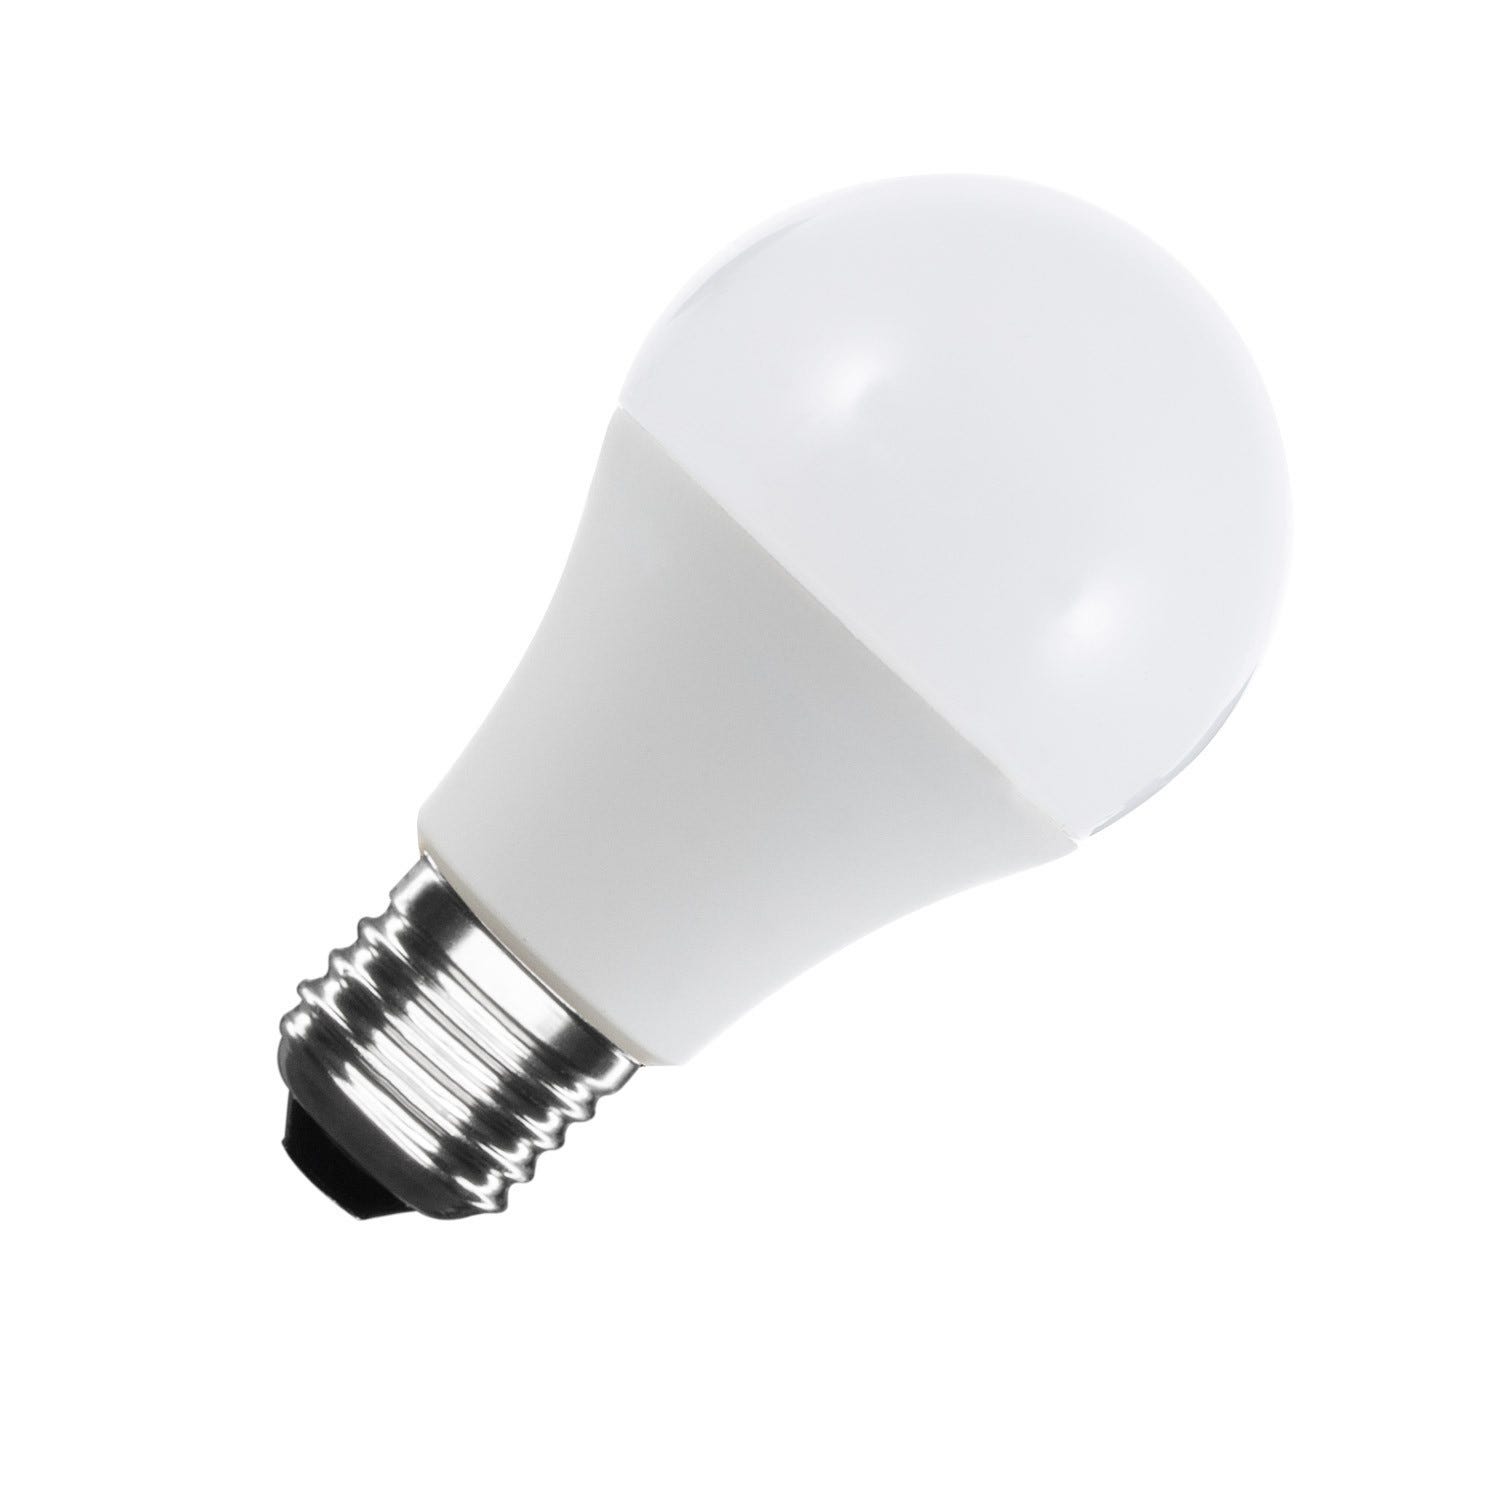 Ampoule LED E27 10W 780 lm A60 12/24V No Flicker Blanc Froid 6500K